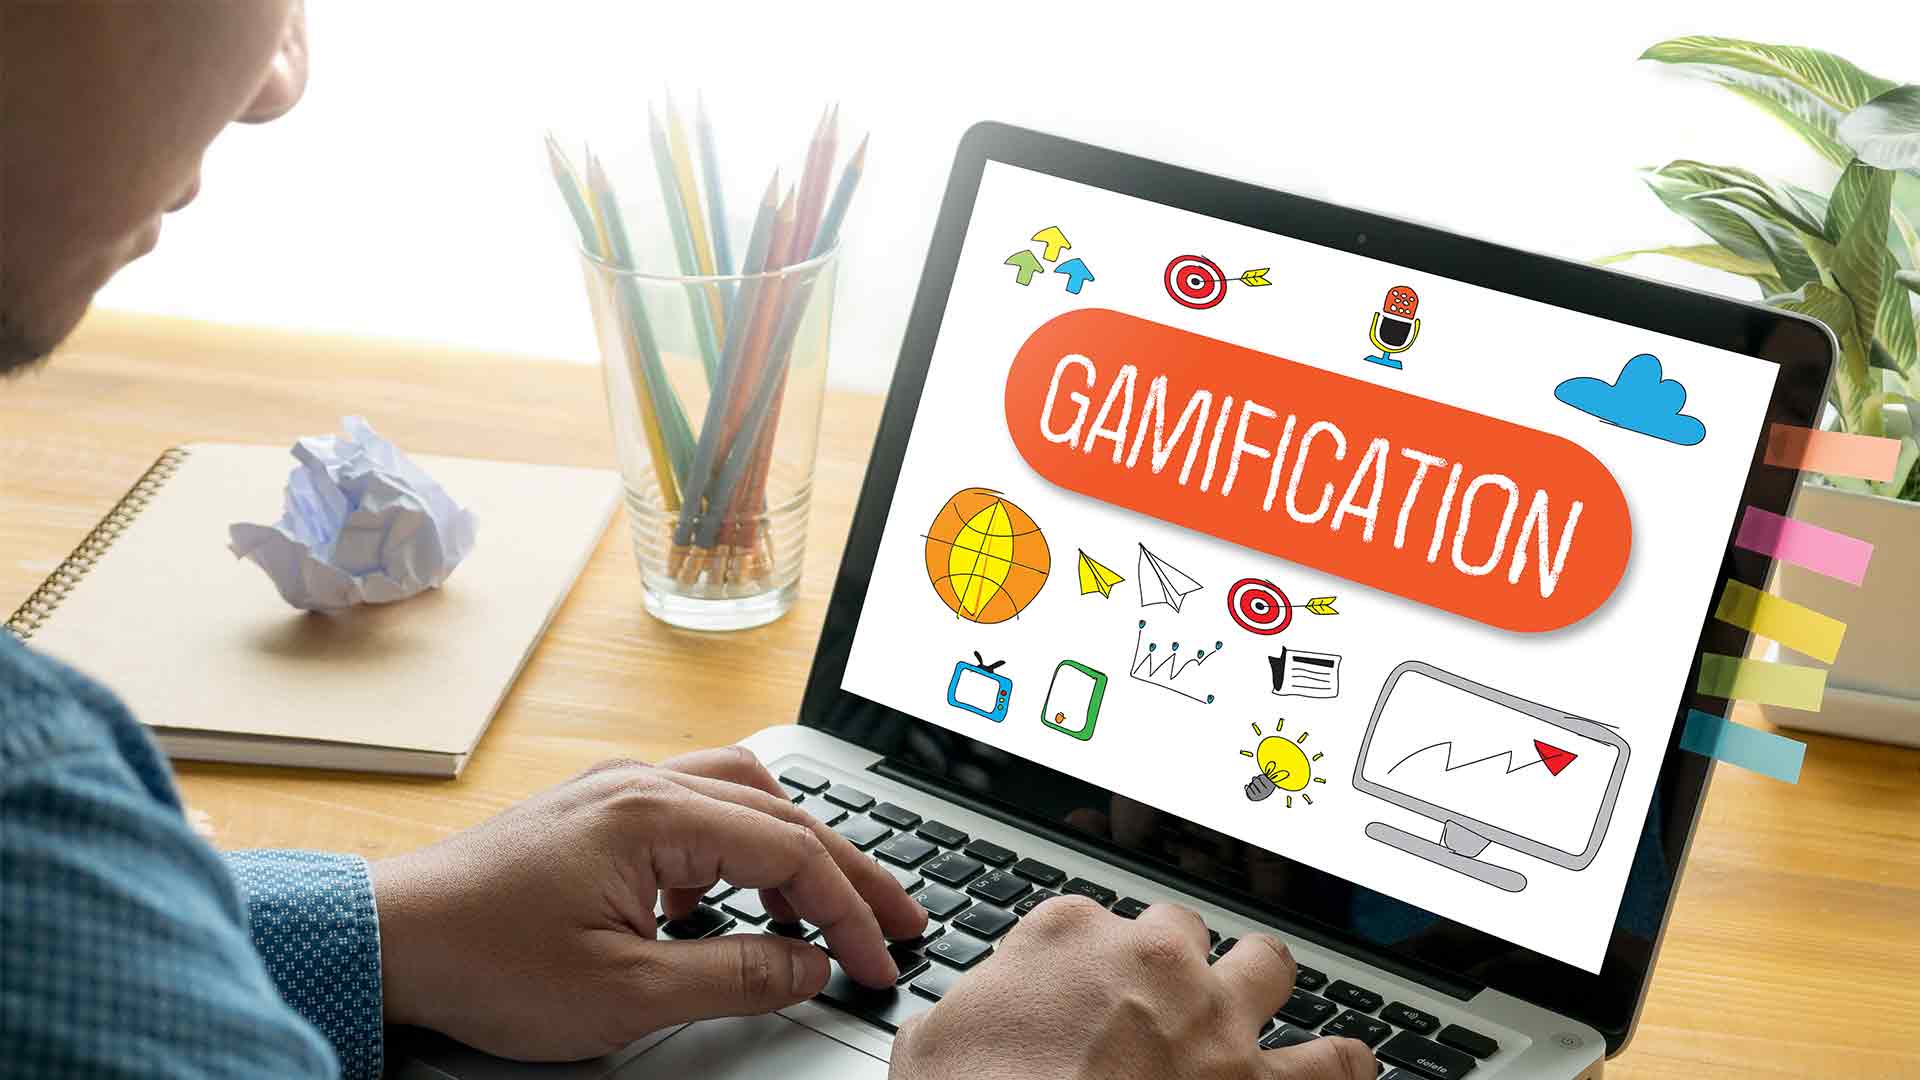 Gamification in eLearning programs